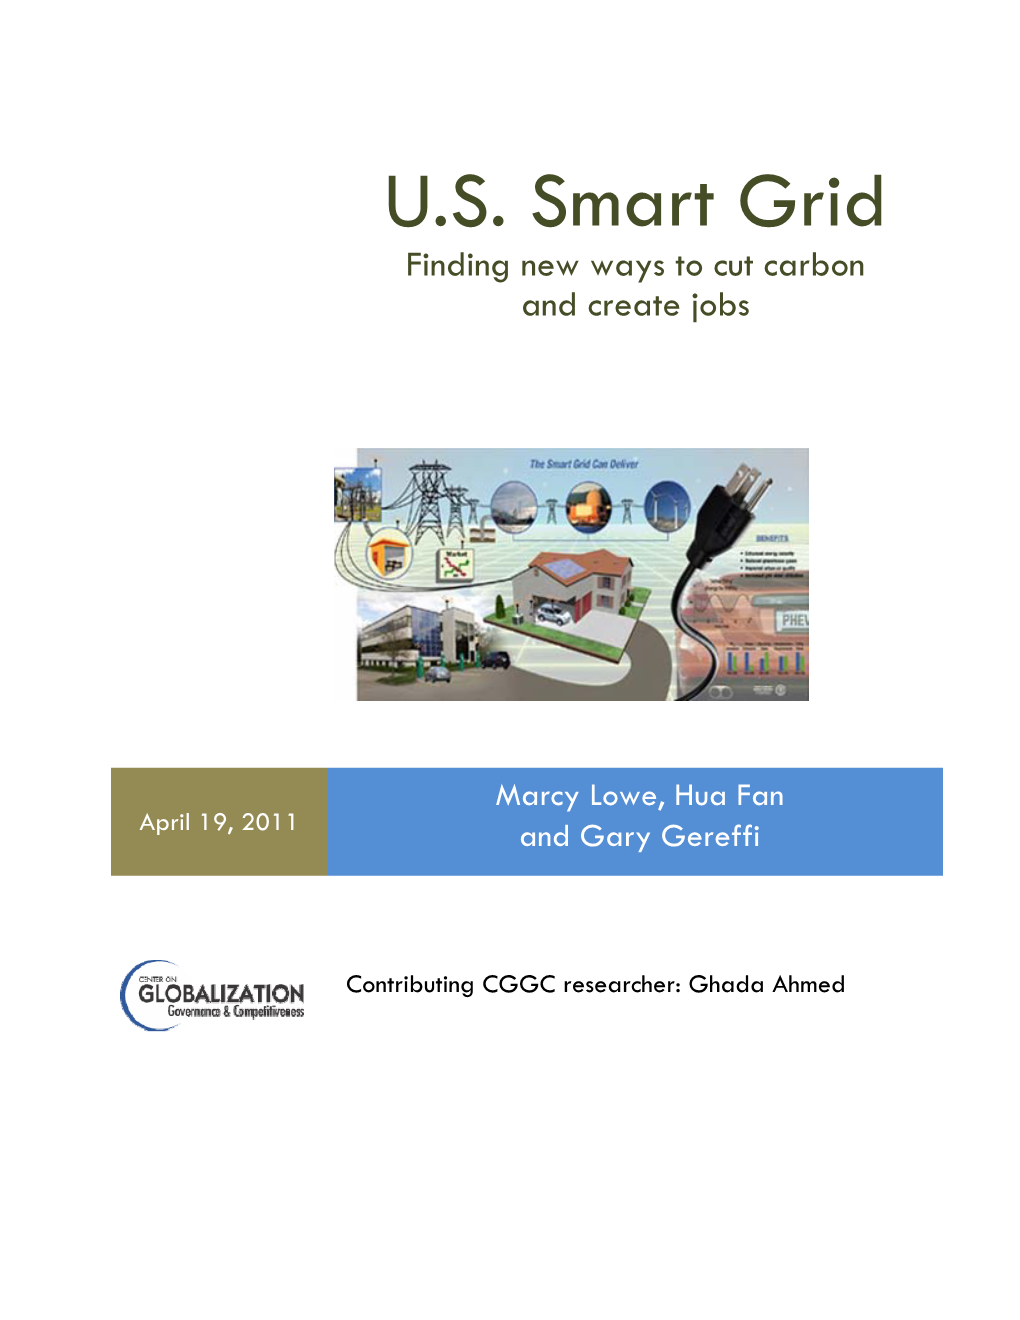 U.S. Smart Grid Finding New Ways to Cut Carbon and Create Jobs